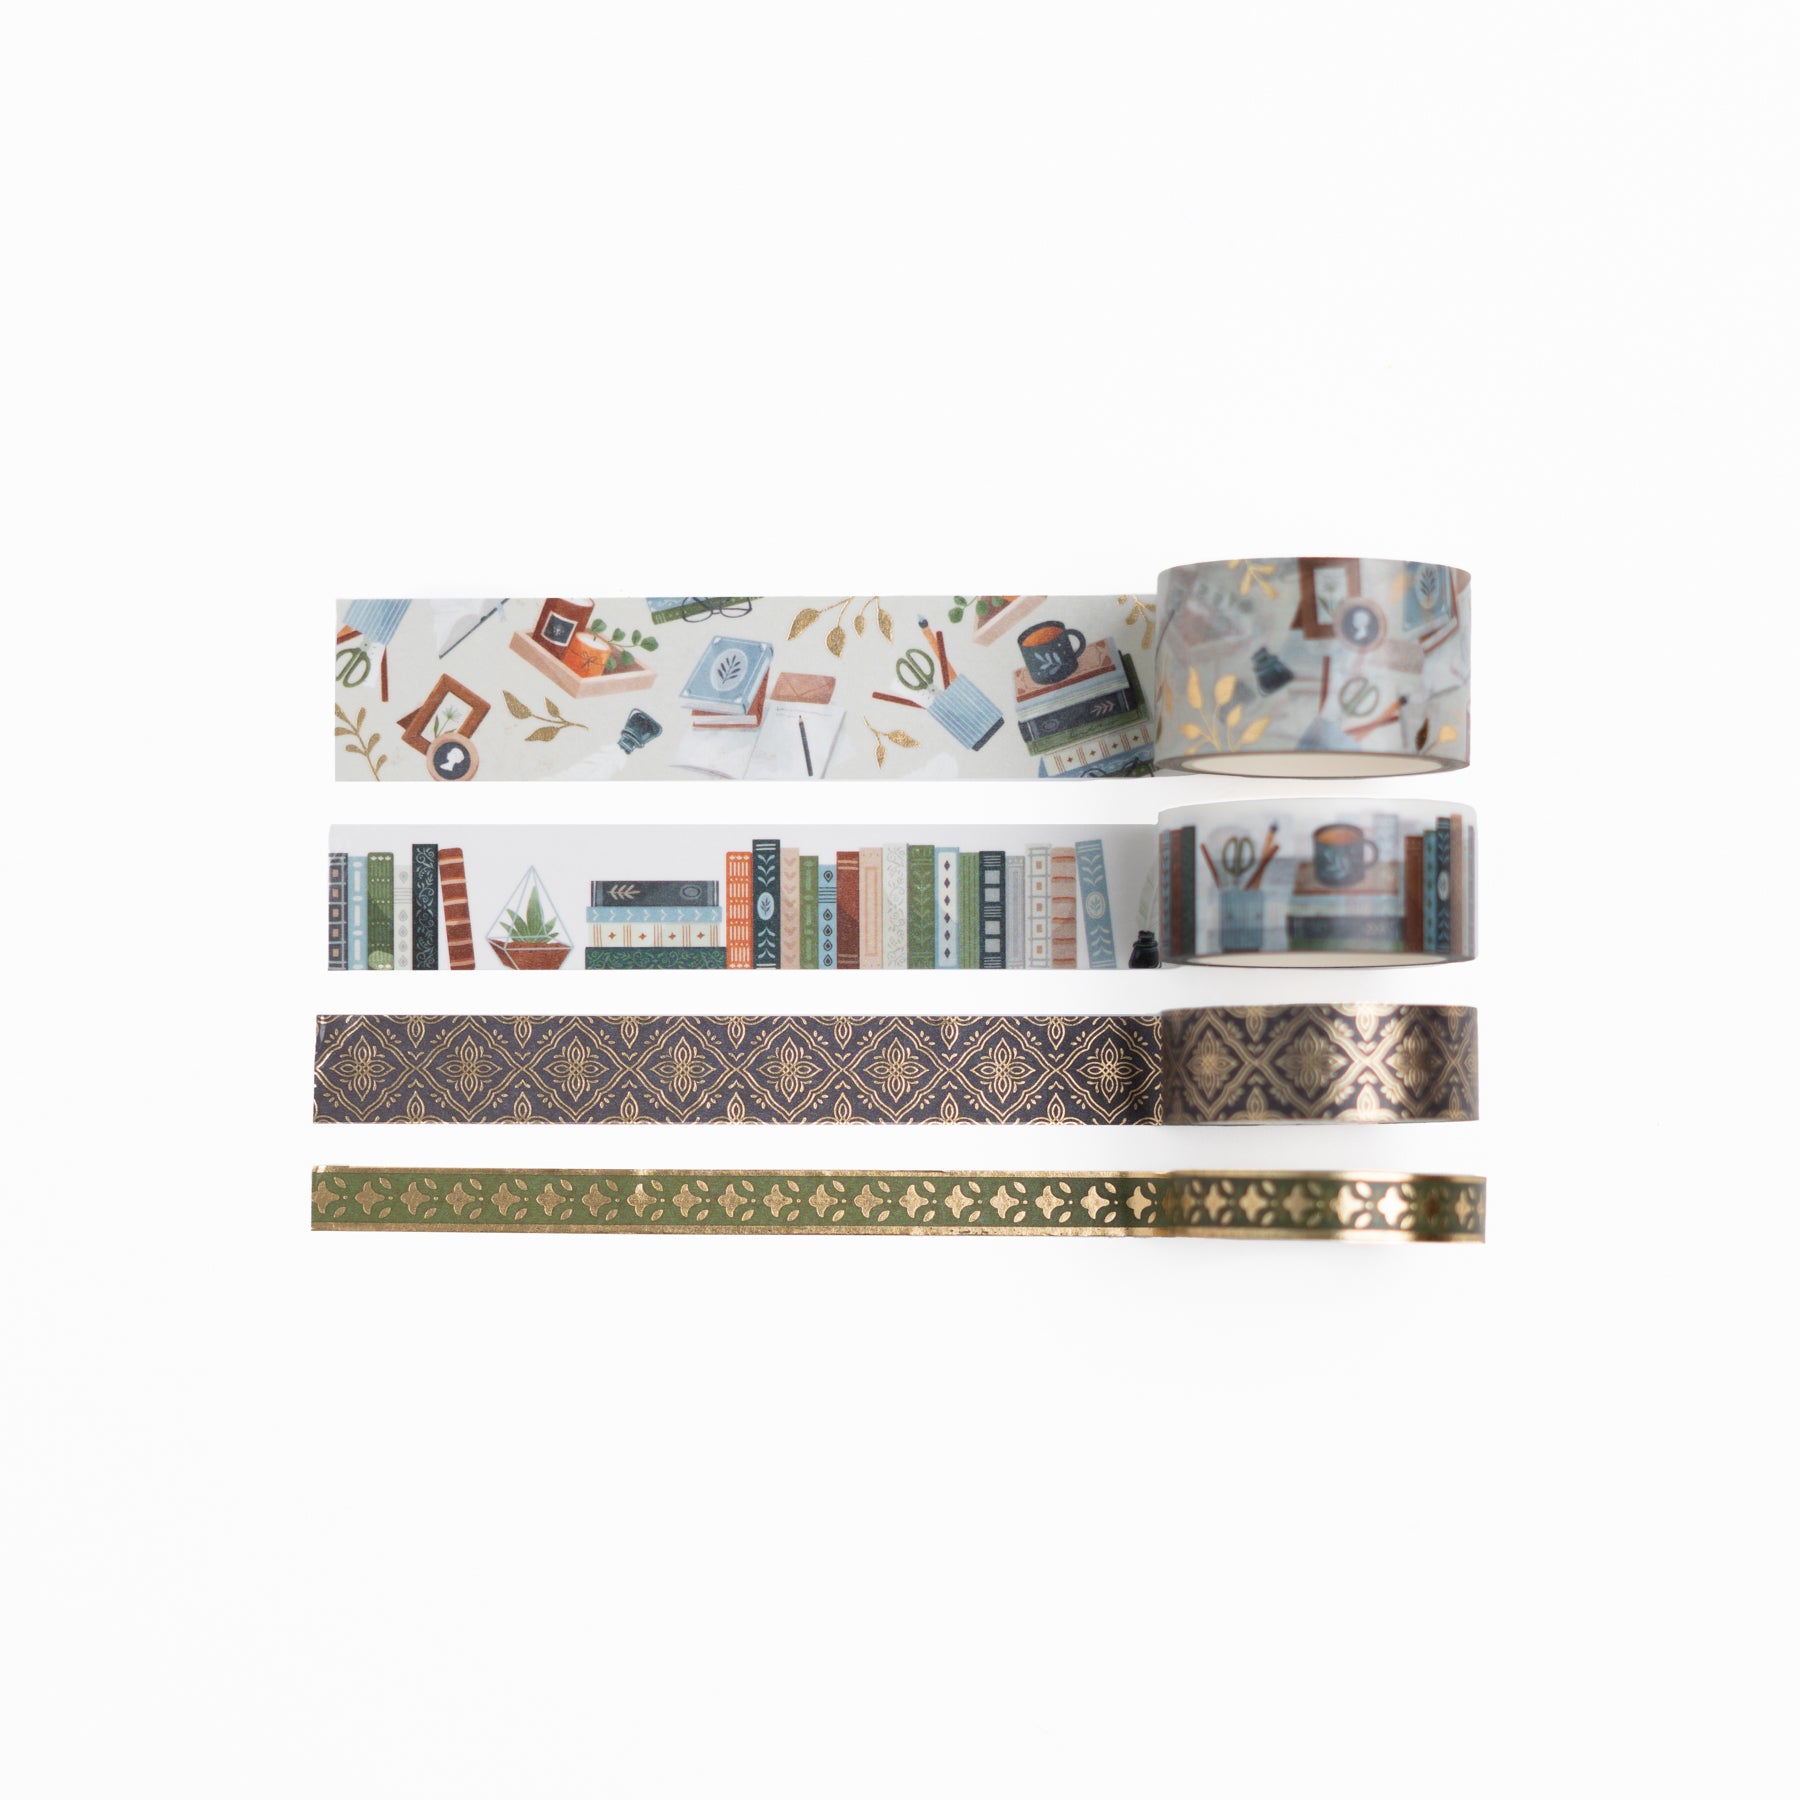 Premium Vector, Drawn cute washi tapes collection